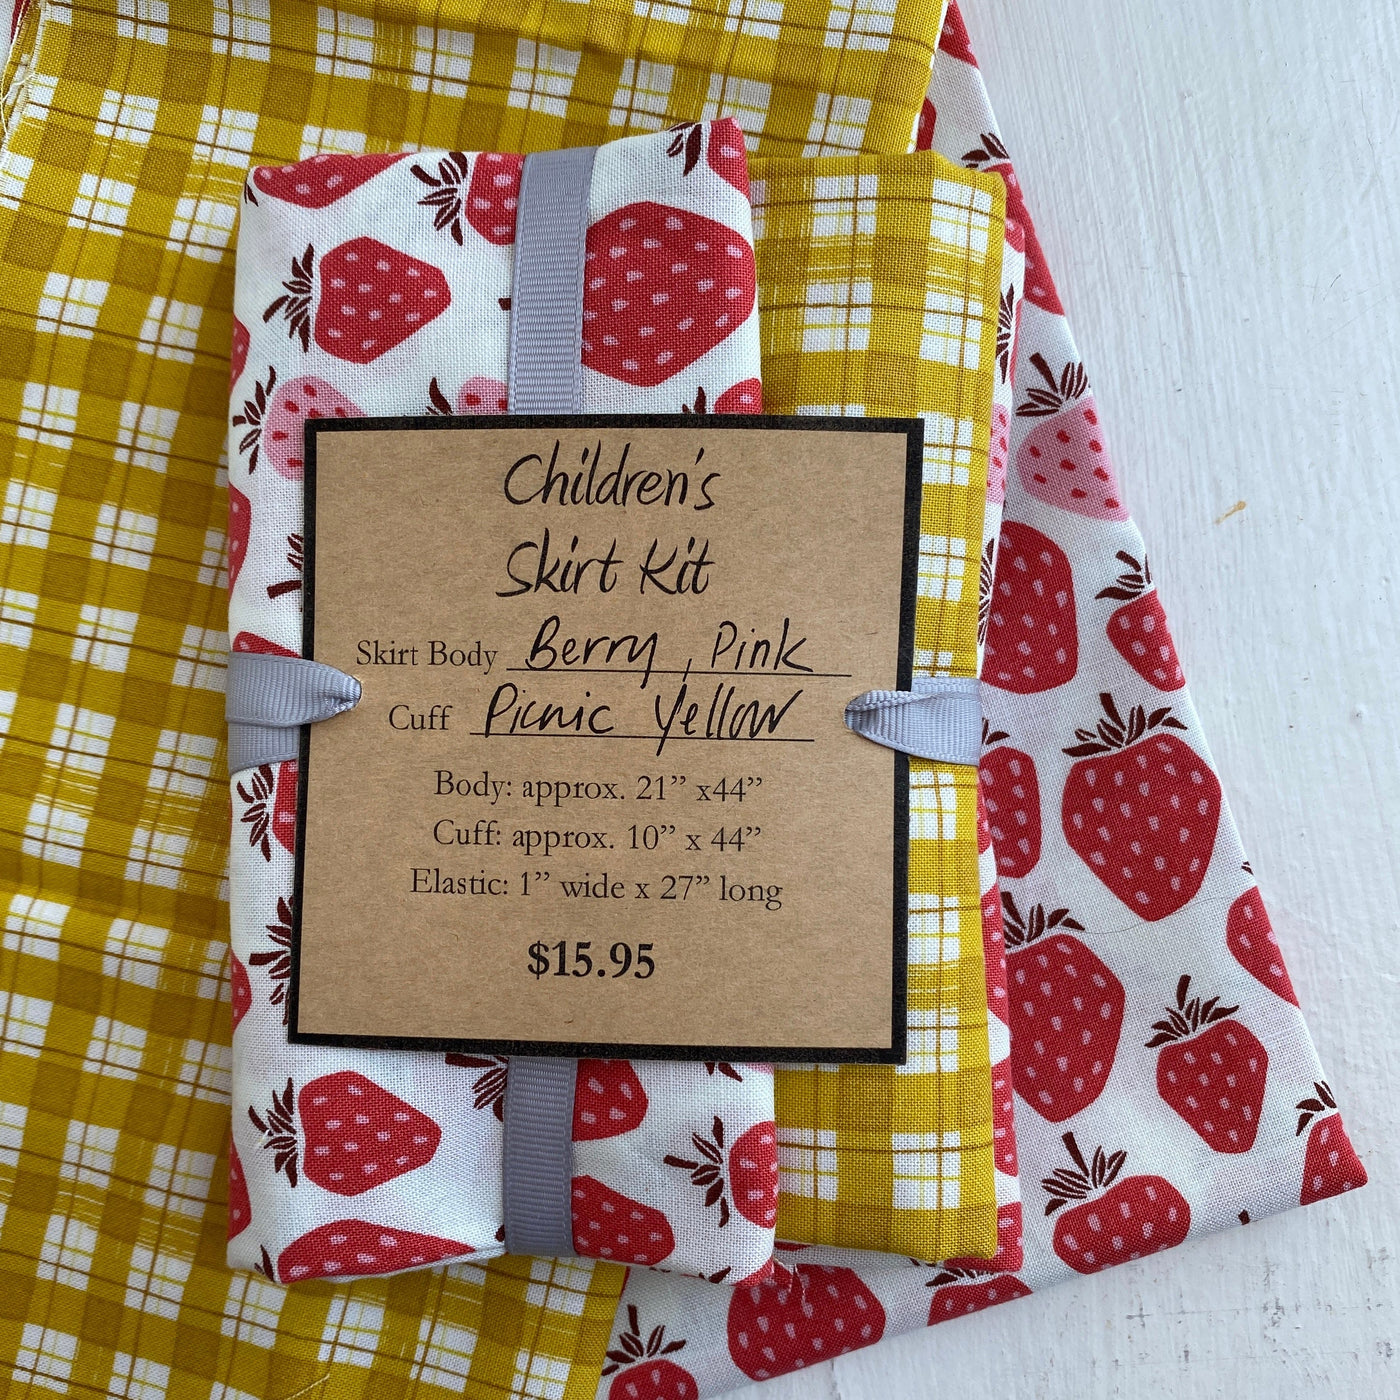 Apple Tree - Child's Skirt Kit - Pink Berry with Yellow Picnic Cuff